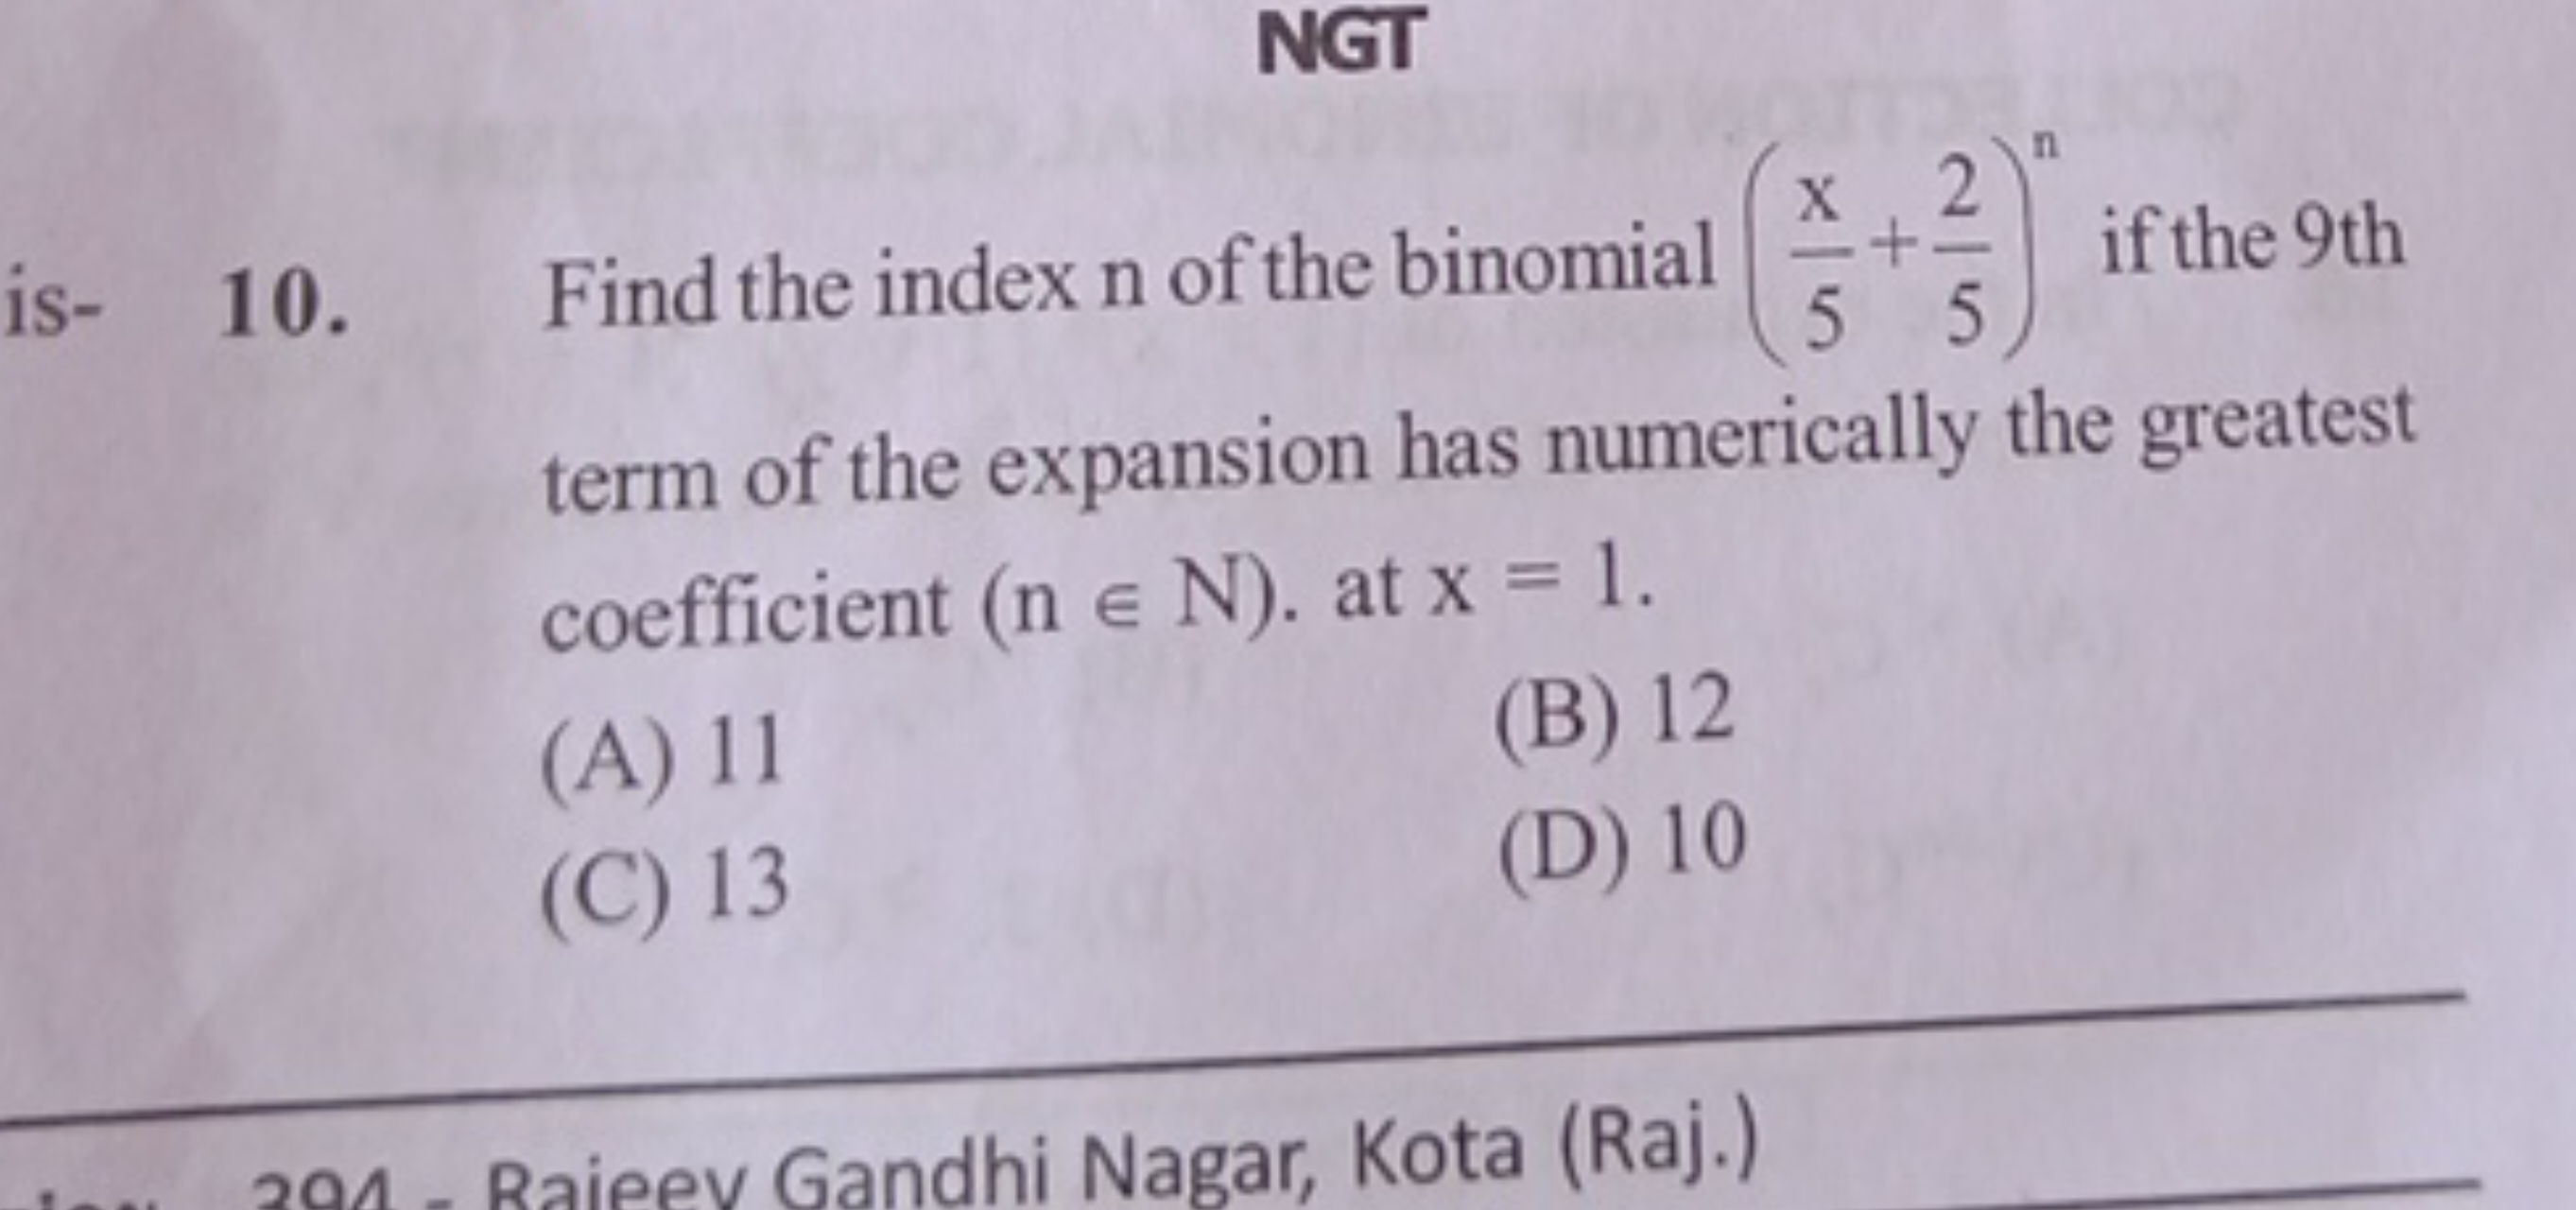 NGT term of the expansion has numerically the greatest coefficient (n∈